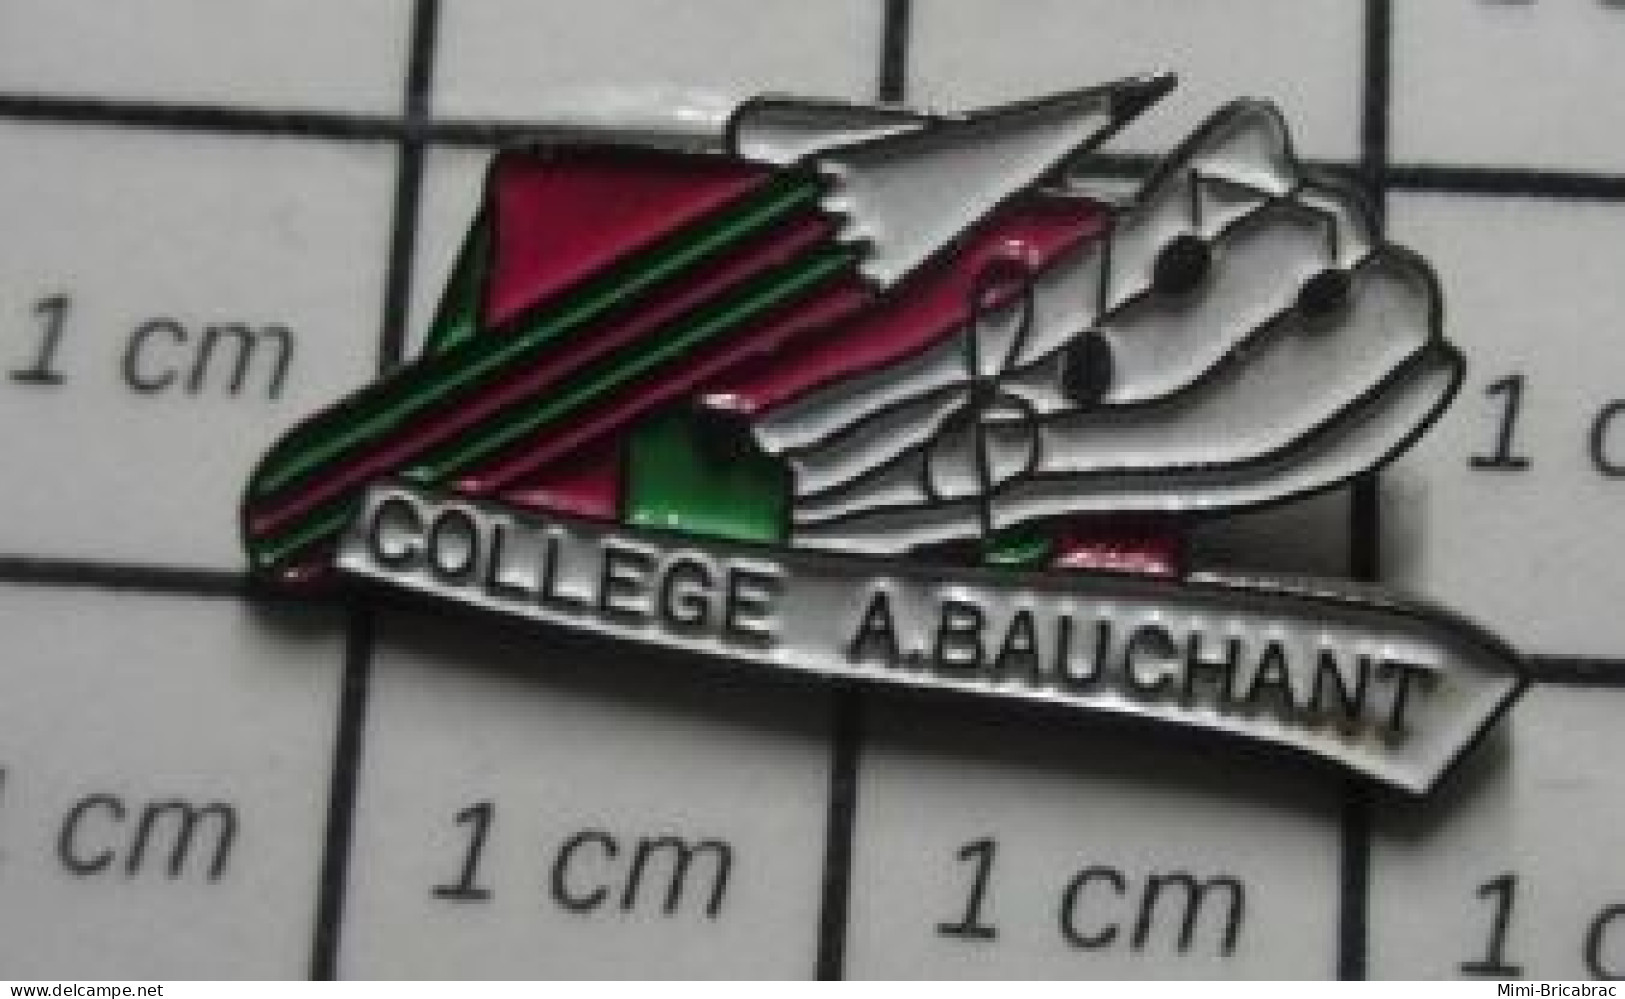 3517 Pin's Pins / Beau Et Rare / ADMINISTRATIONS / COLLEGE A BAUCHANT CRAYON PORTEE MUSICALE - Administration